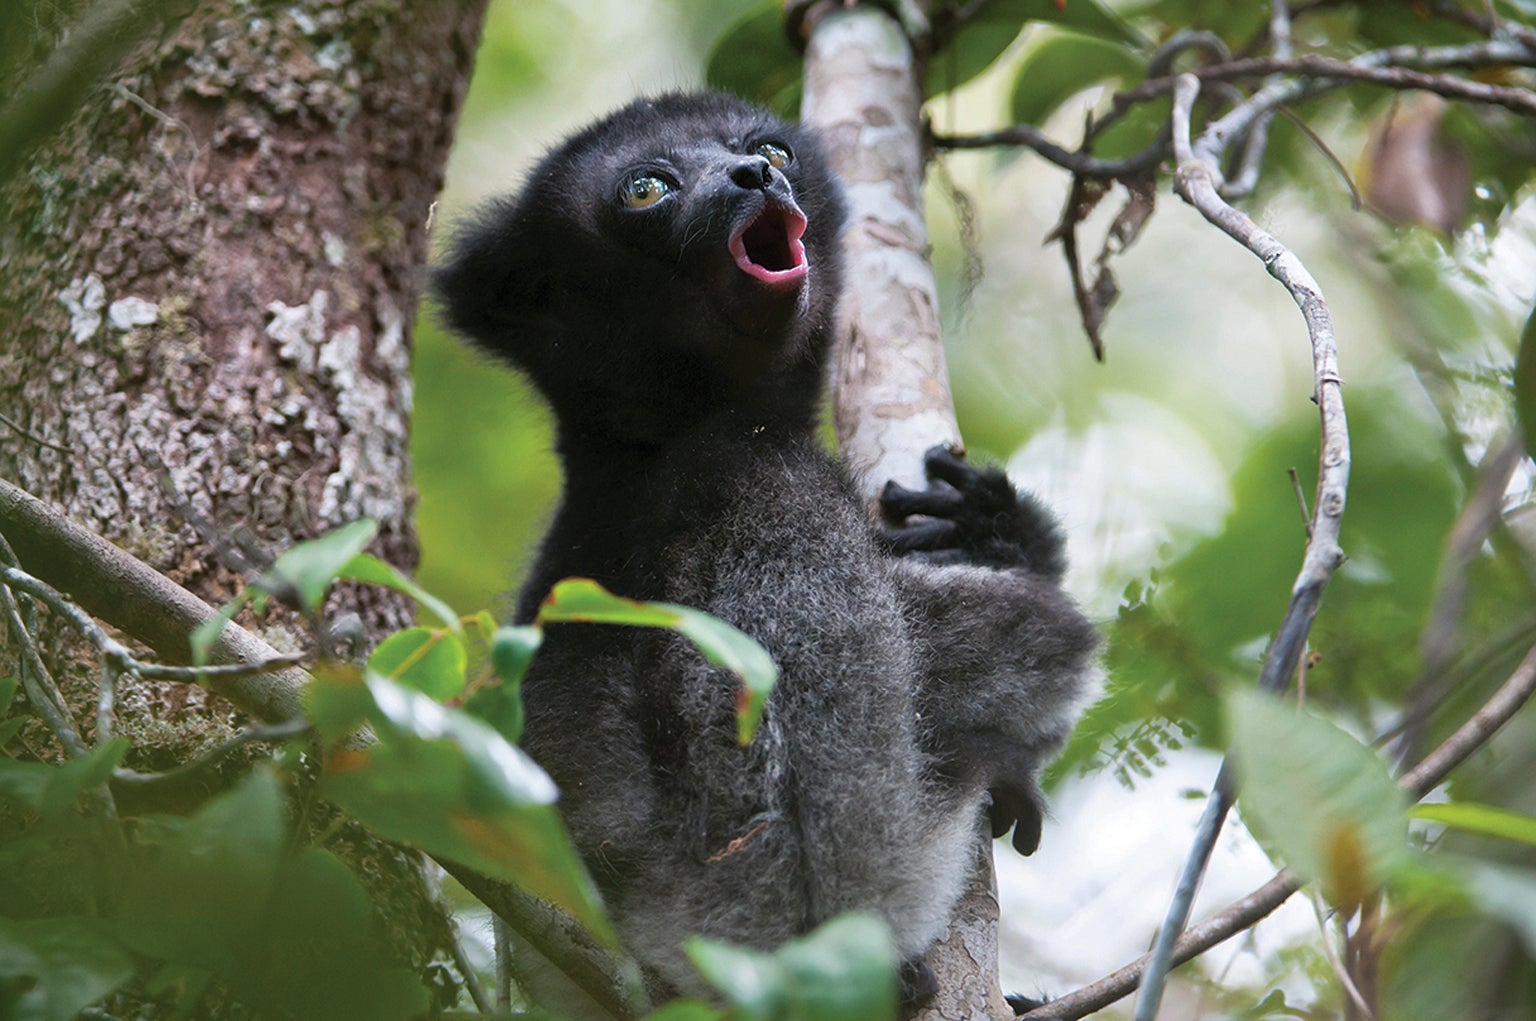 Two-month-old lemur.